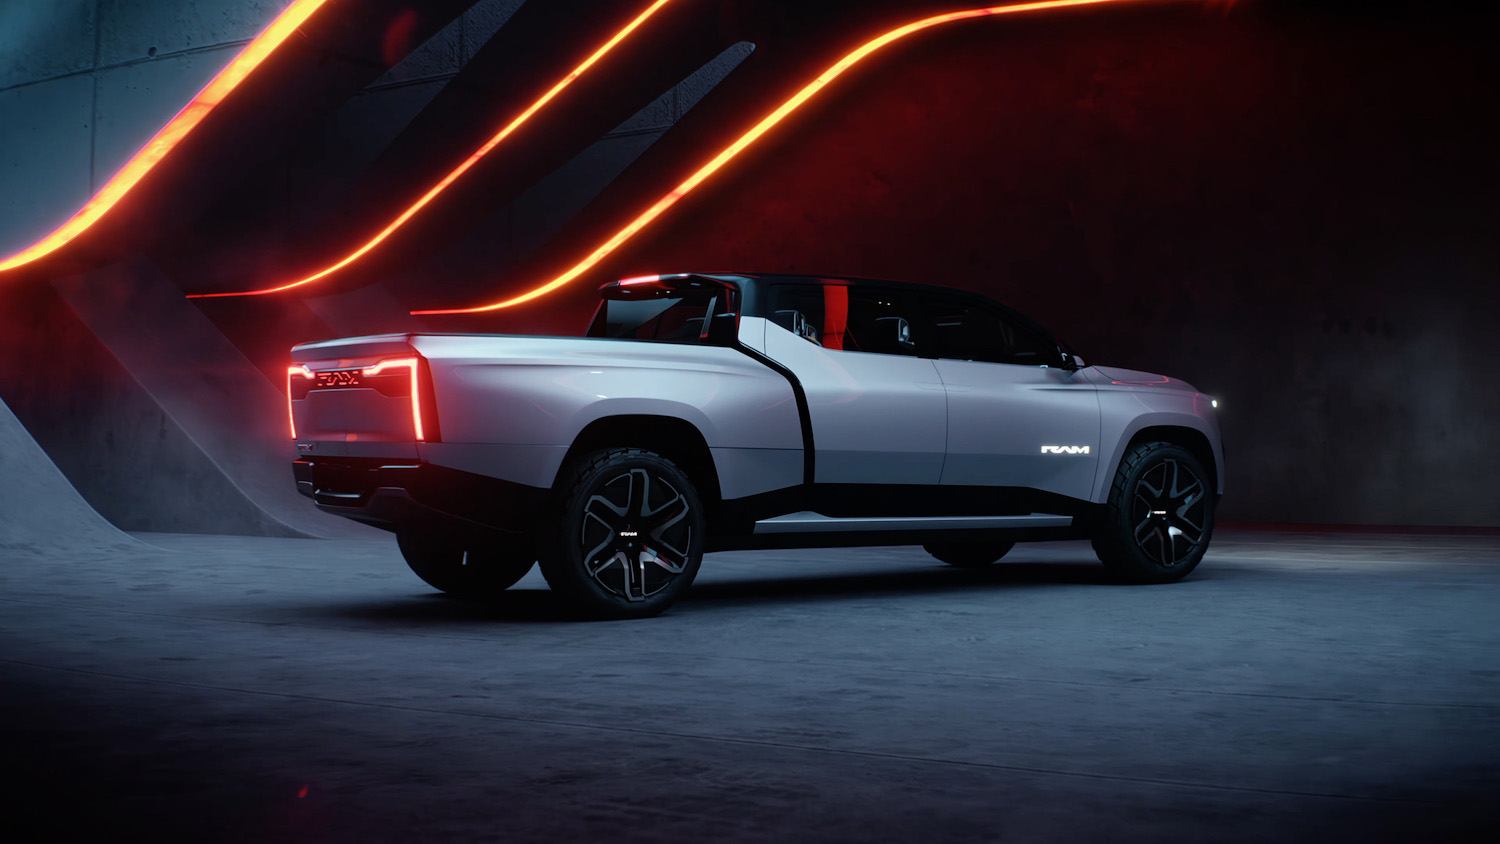 Promo for a 2024 Ram 1500 Revolution electric pickup that may offer significantly more ground clearance than the current 2500 Power Wagon